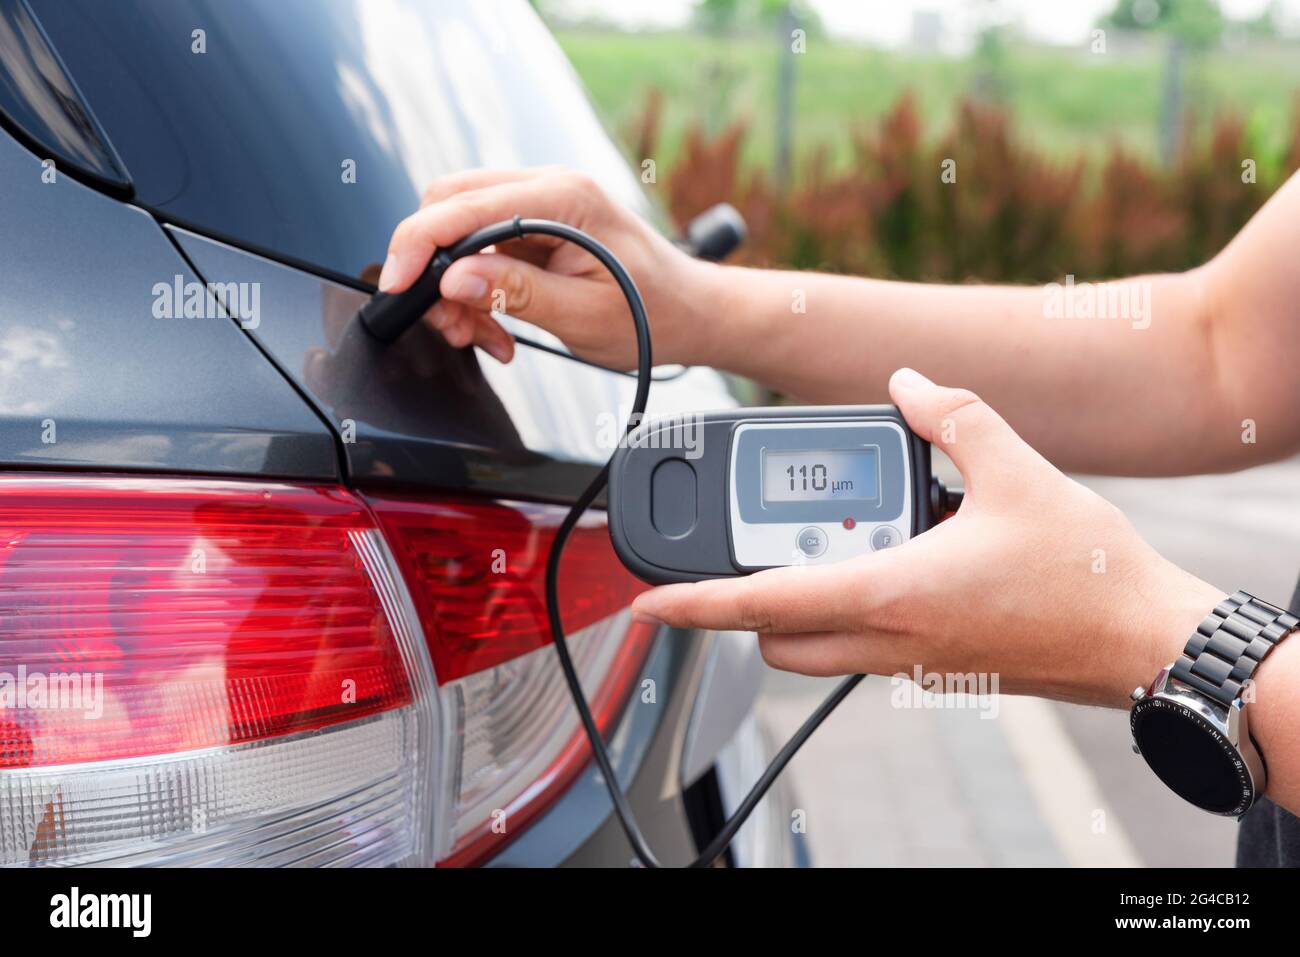 Measuring thickness of the car paint coating with paint thickness gauge Stock Photo